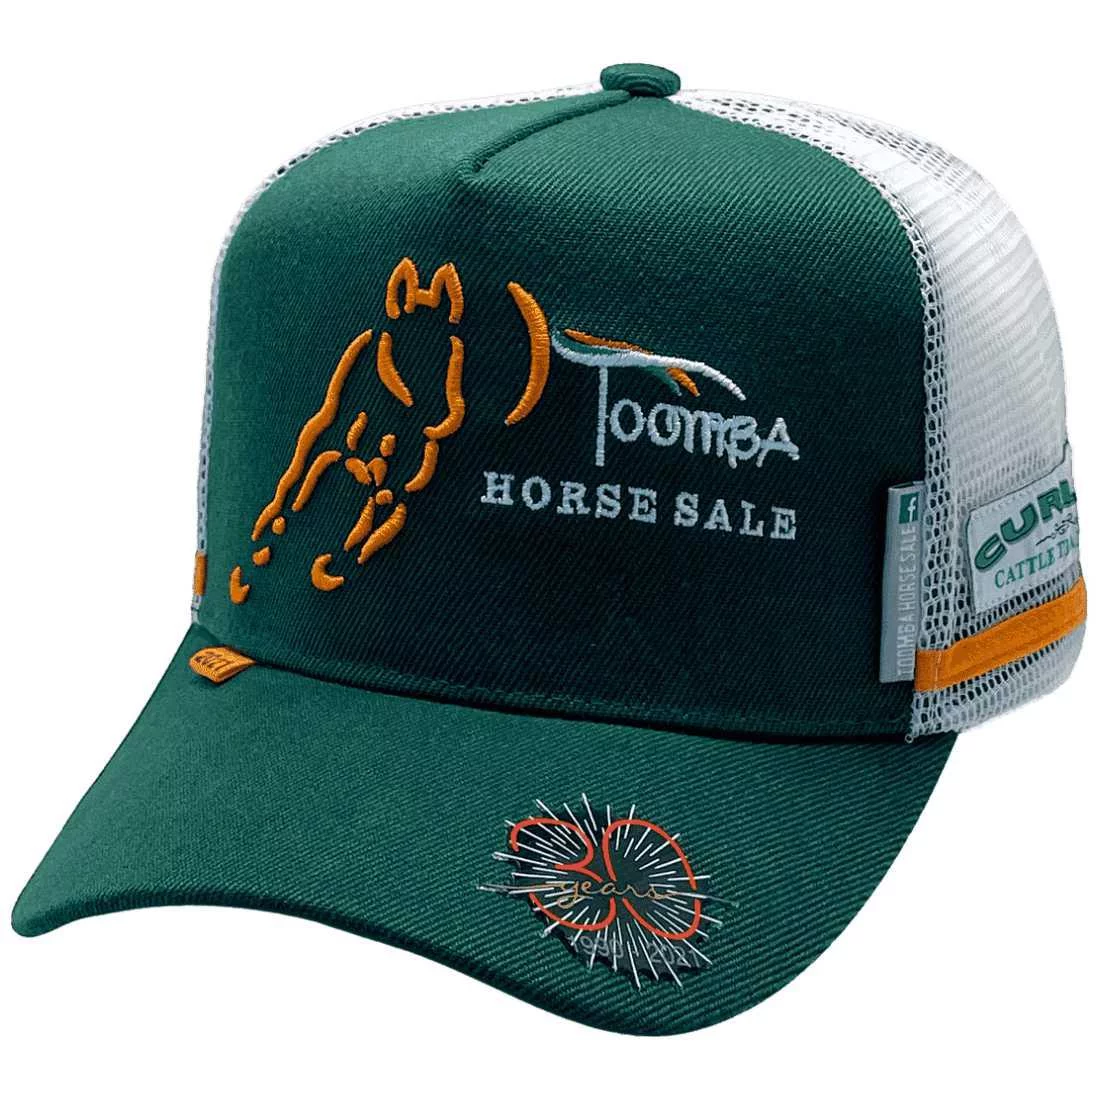 Toomba Horse Sale Charters Towers QLD - Original Power Aussie Trucker Hat with double side bands- Bottle Green HP Acrylic